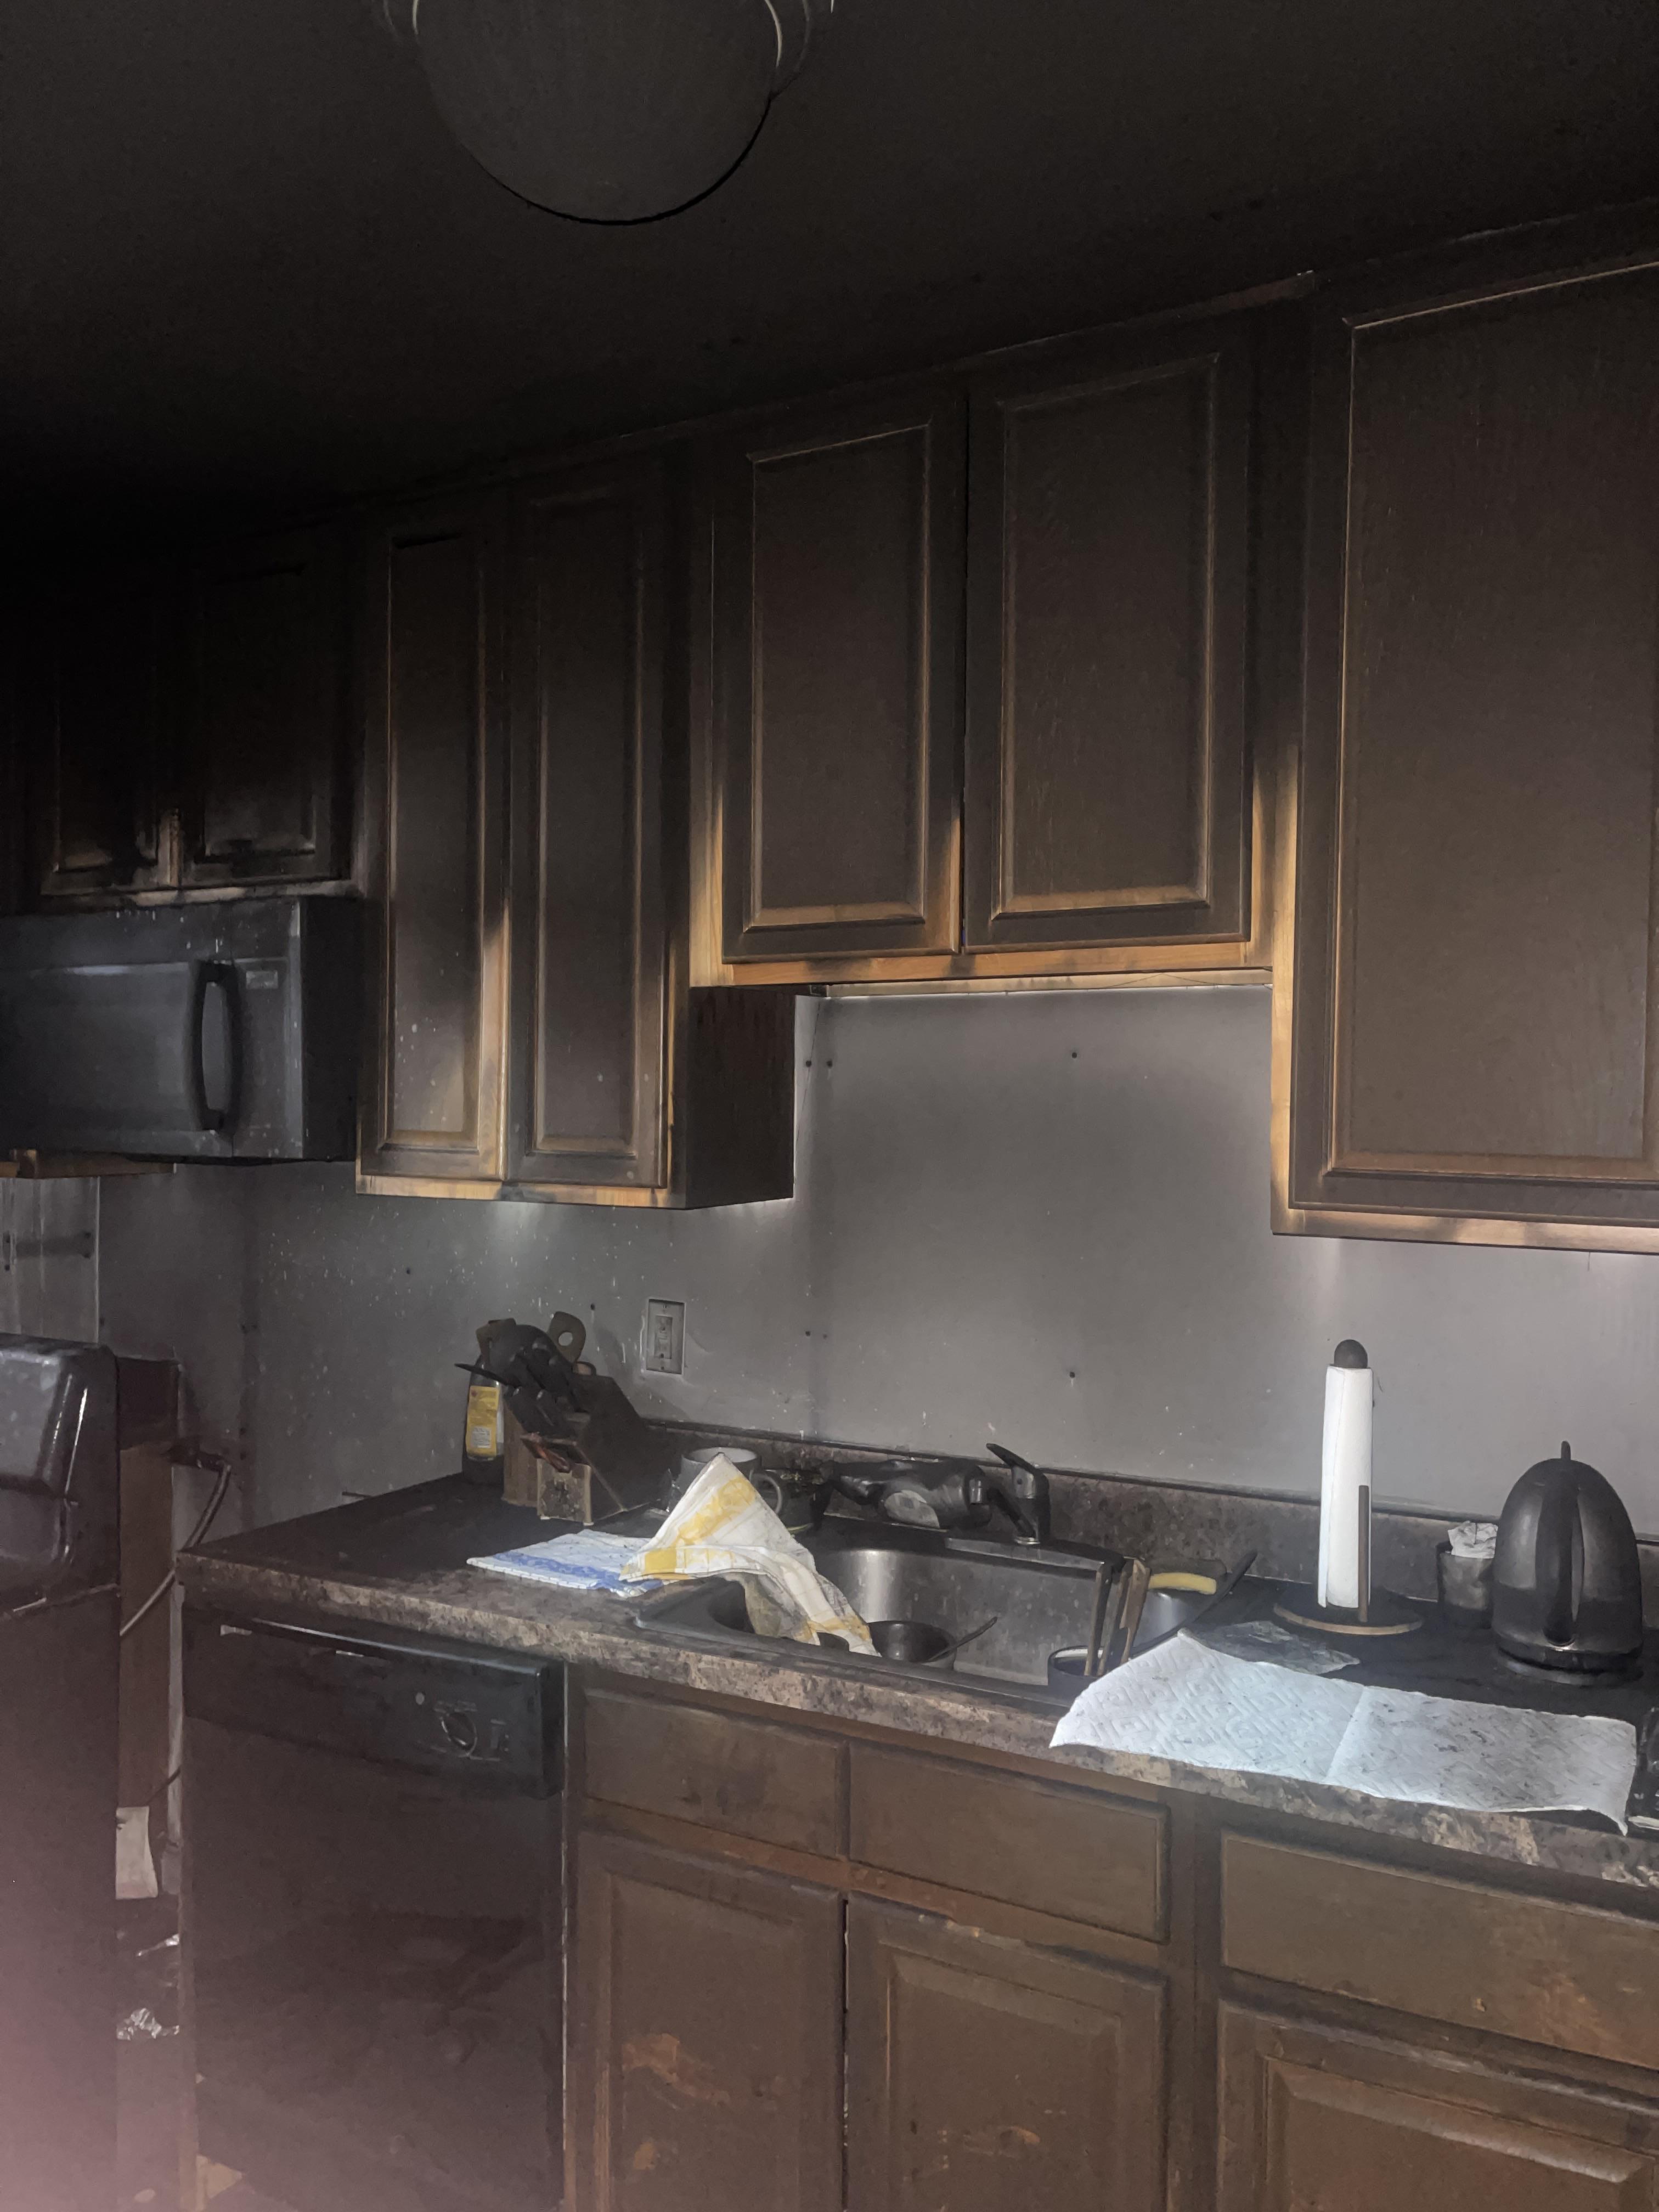 Smoke and Soot Covered Kitchen Walls